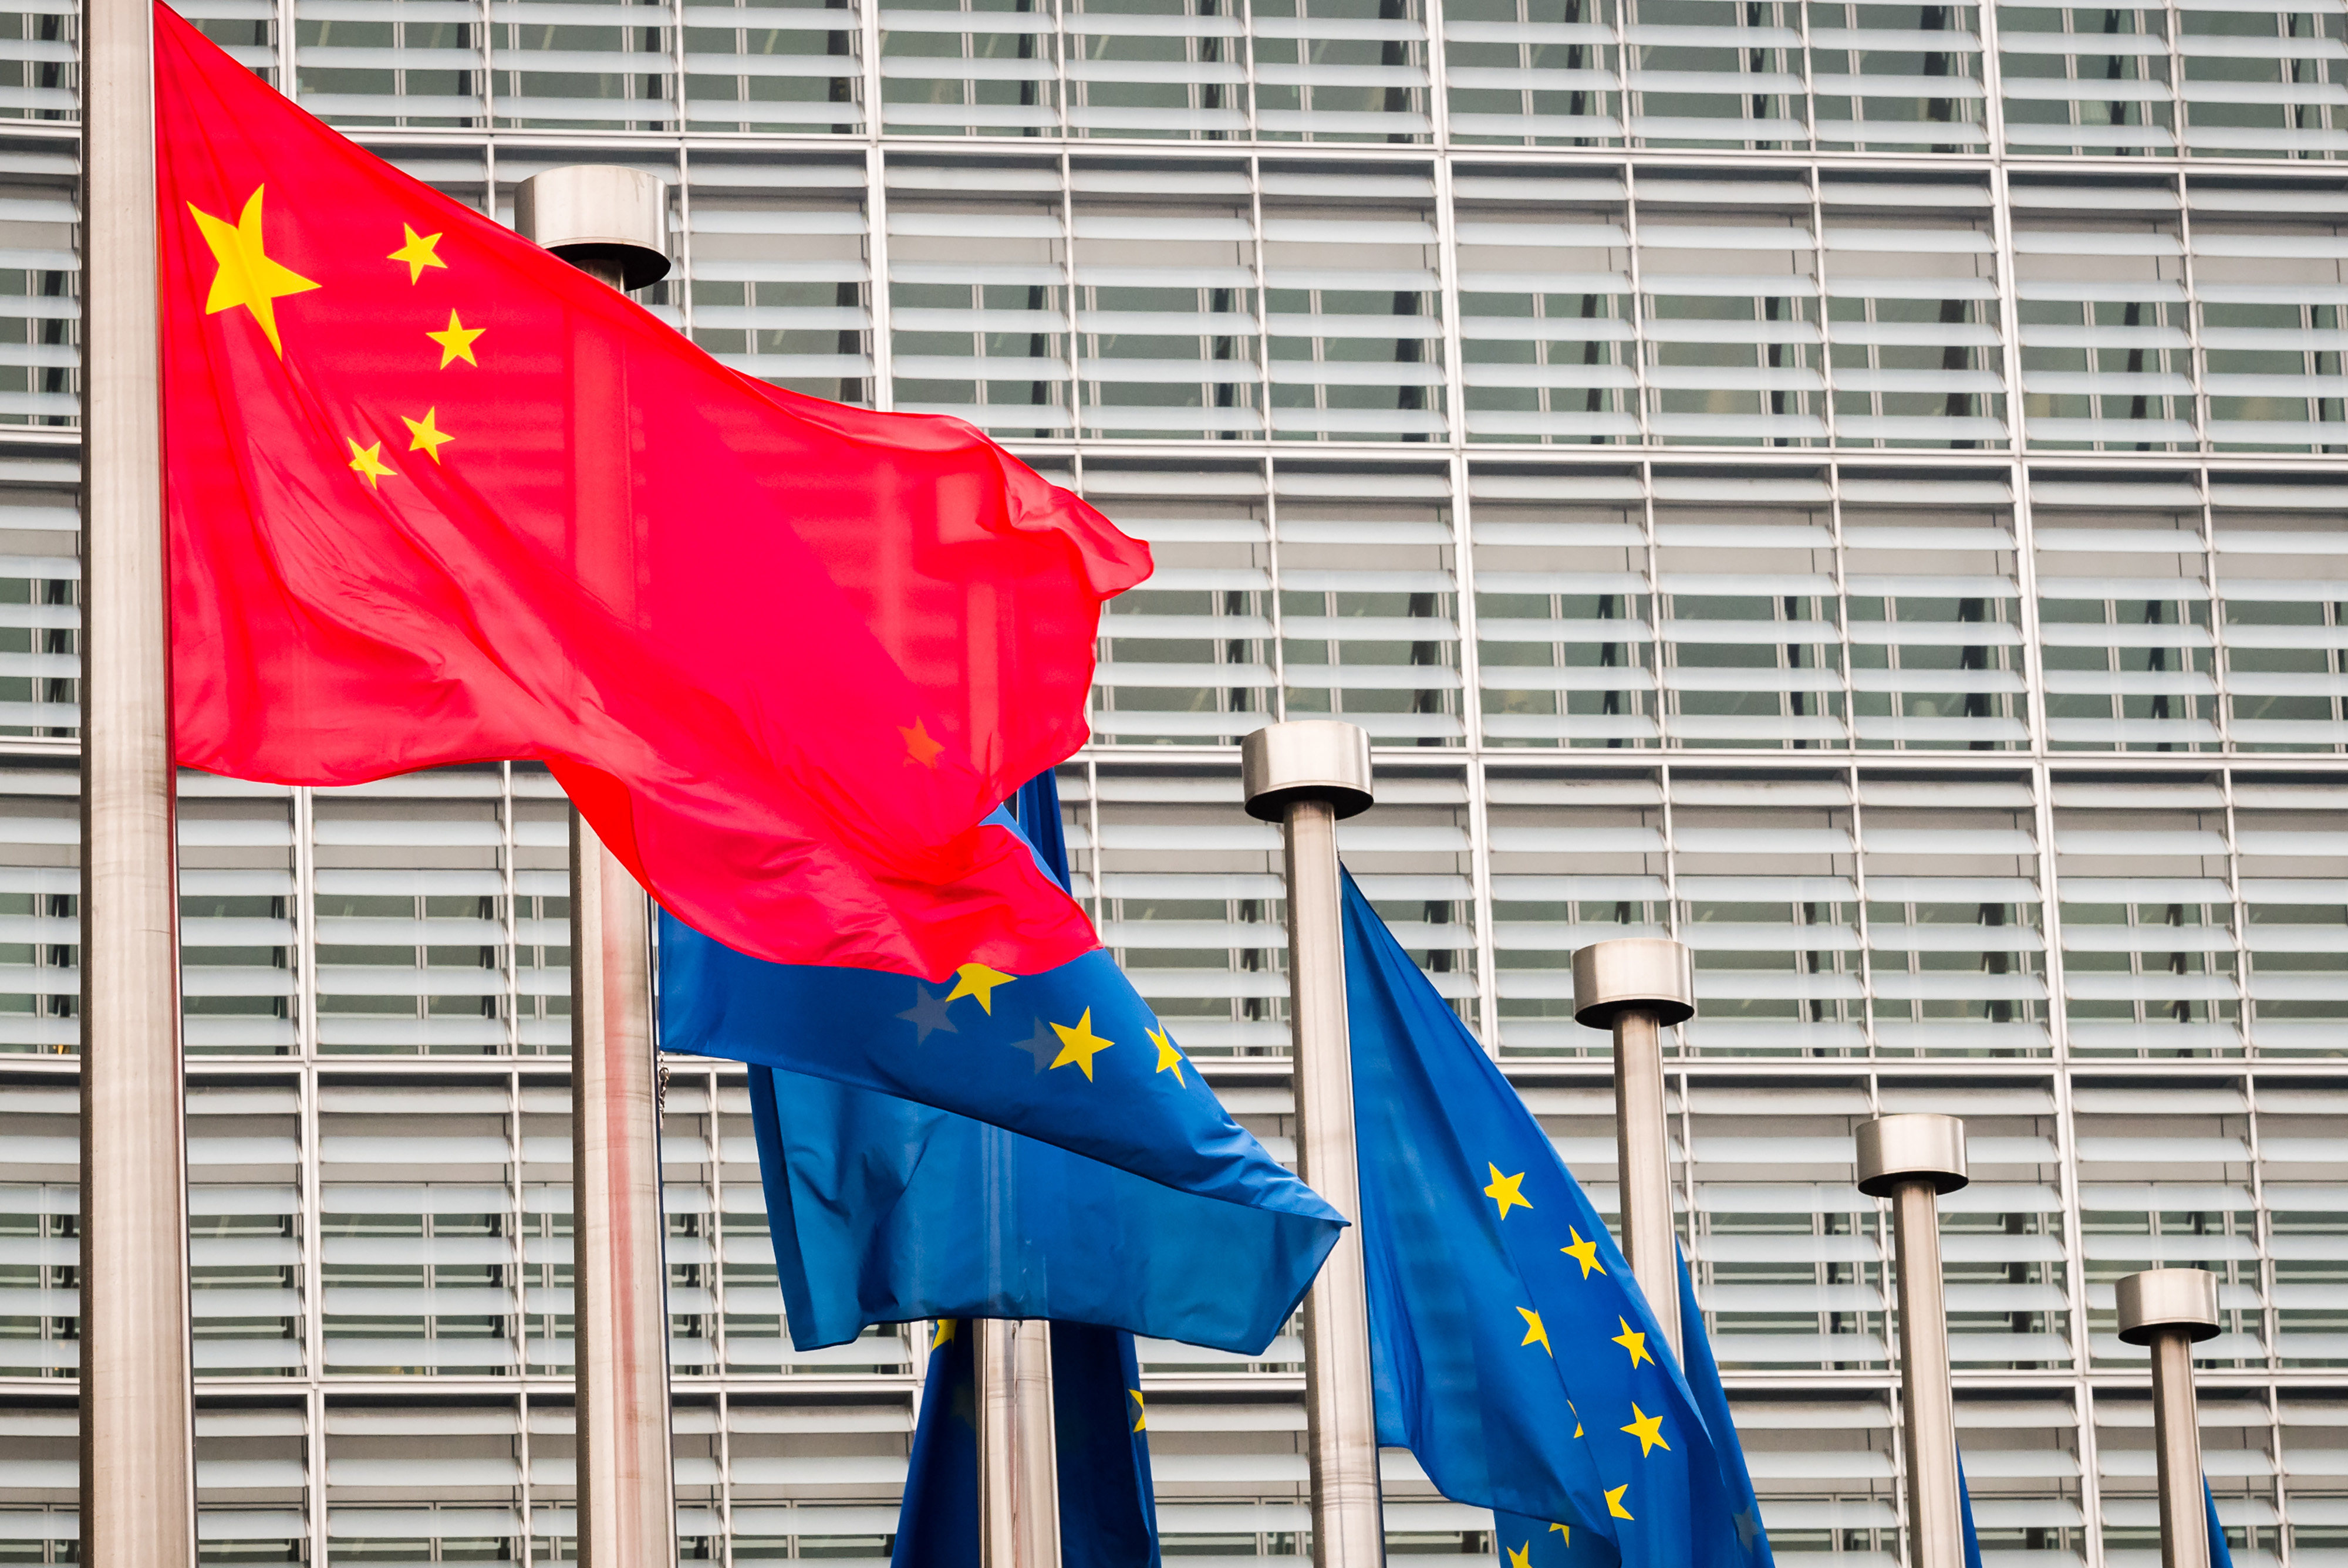 China has been one of Europe’s “incredibly important” investors, according to the CFO of the euro-zone rescue fund. Photo: Bloomberg